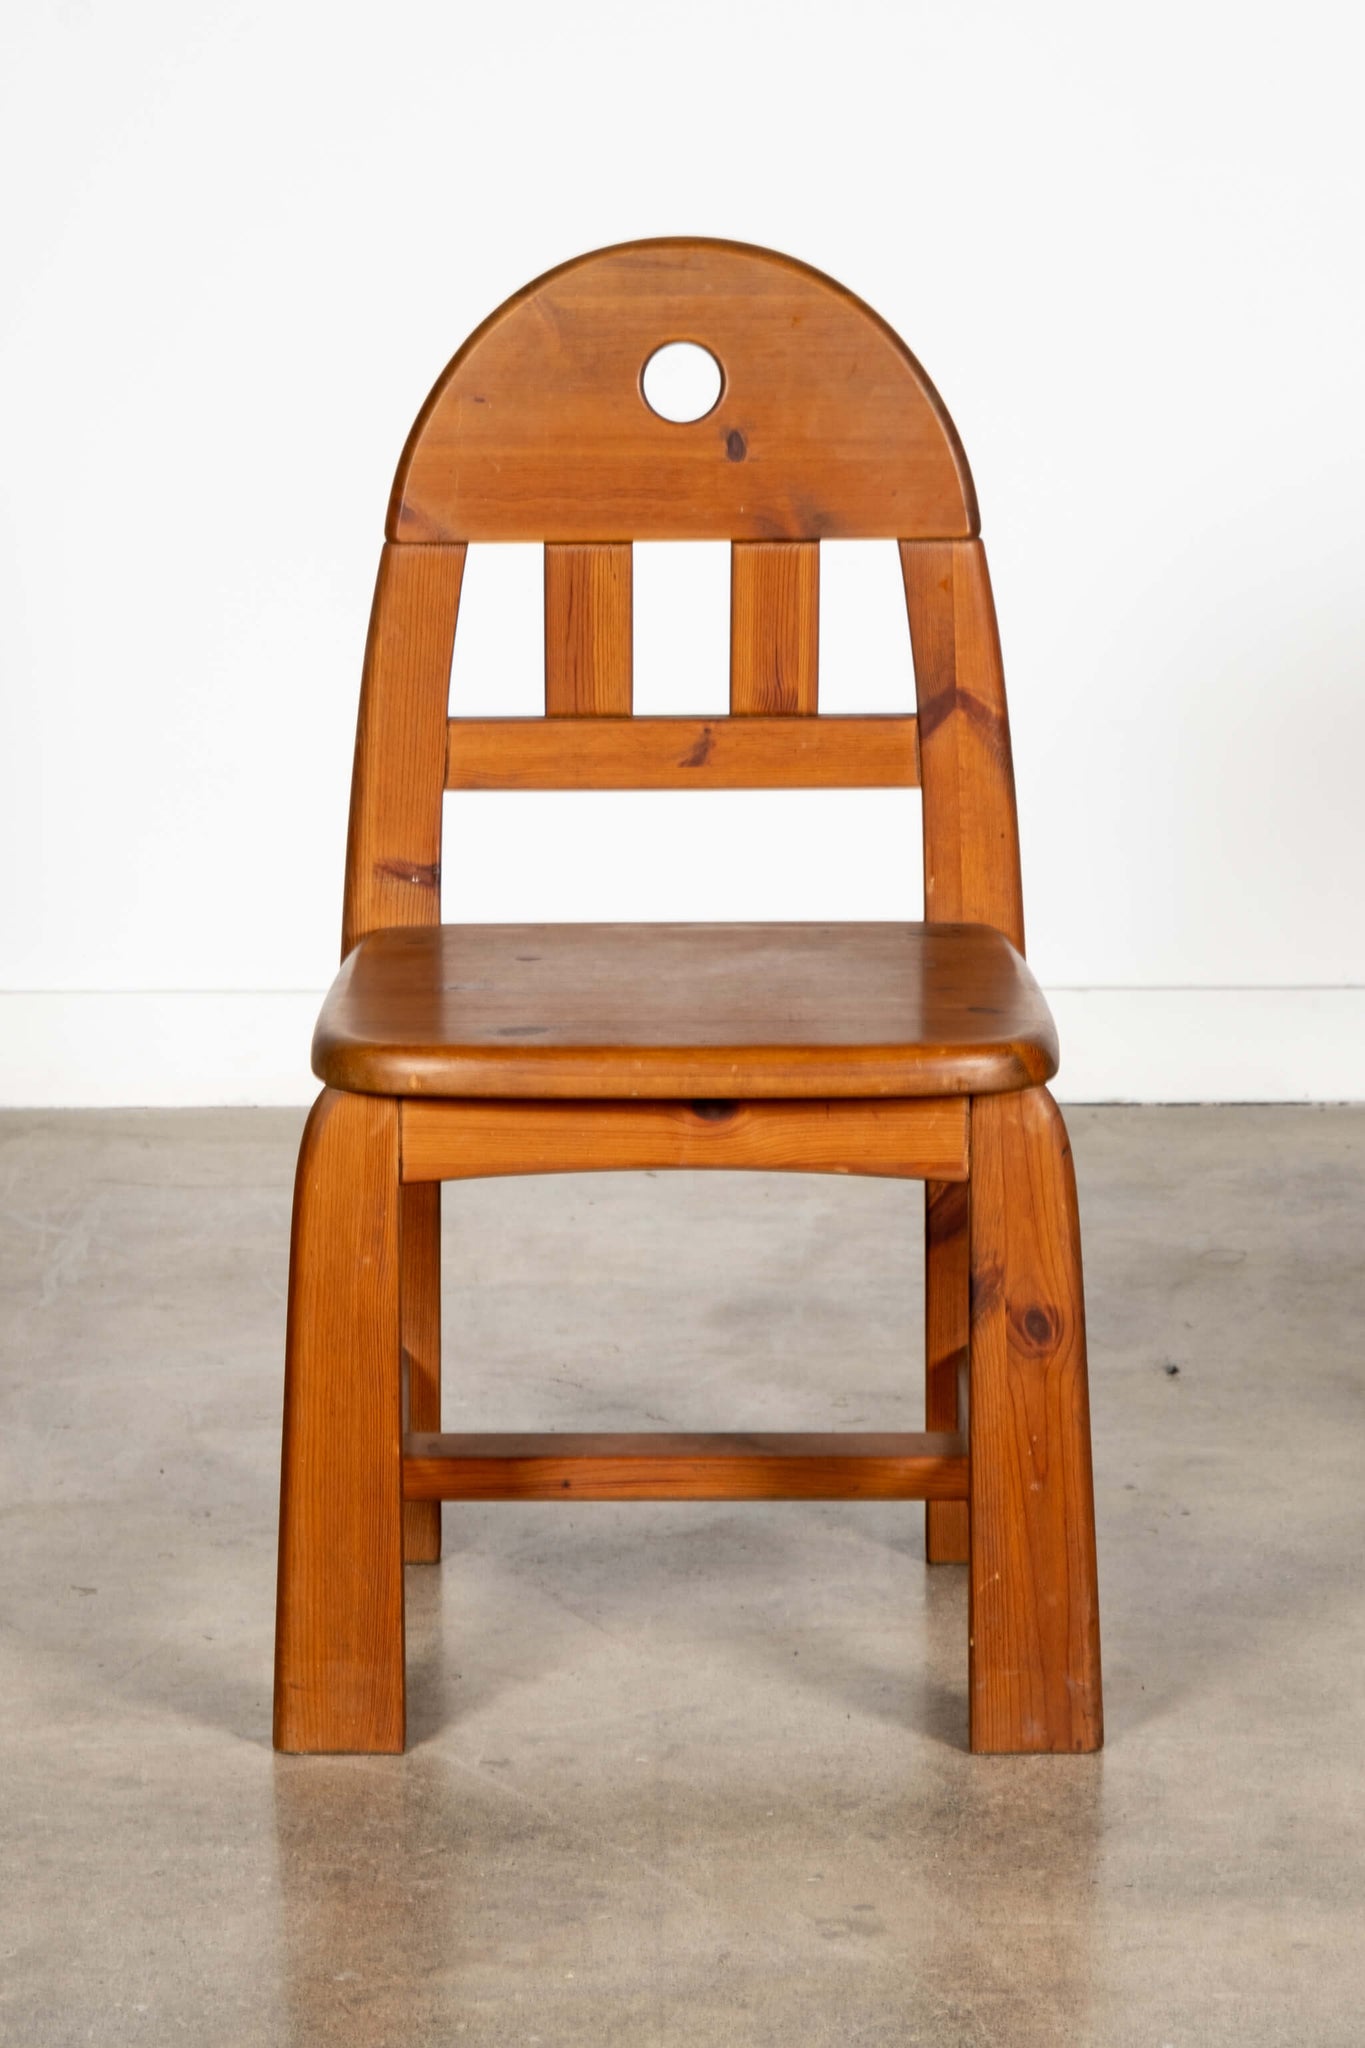 Bonne Choice -French Pine "Play" Chairs x8, sold individually